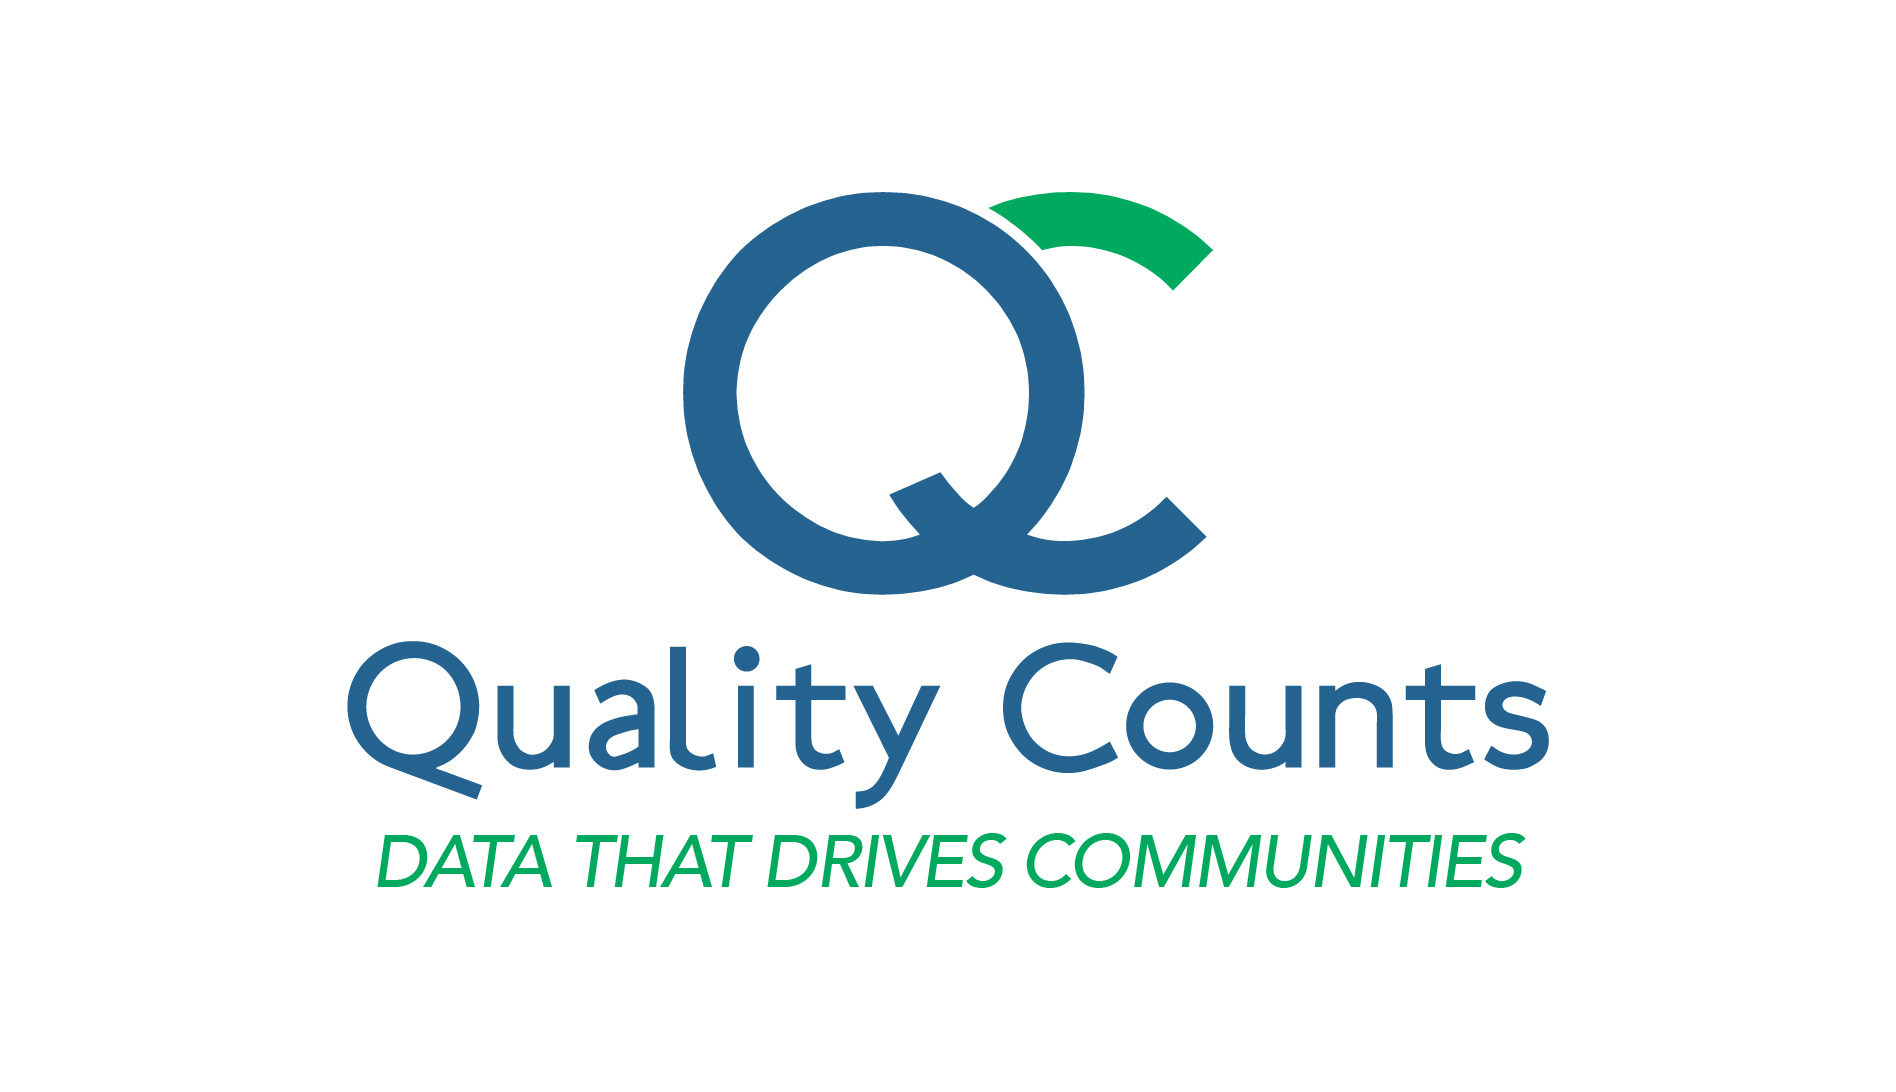 Quality Counts Accelerates Growth Strategy Driven by Technology, Data &amp; Communities